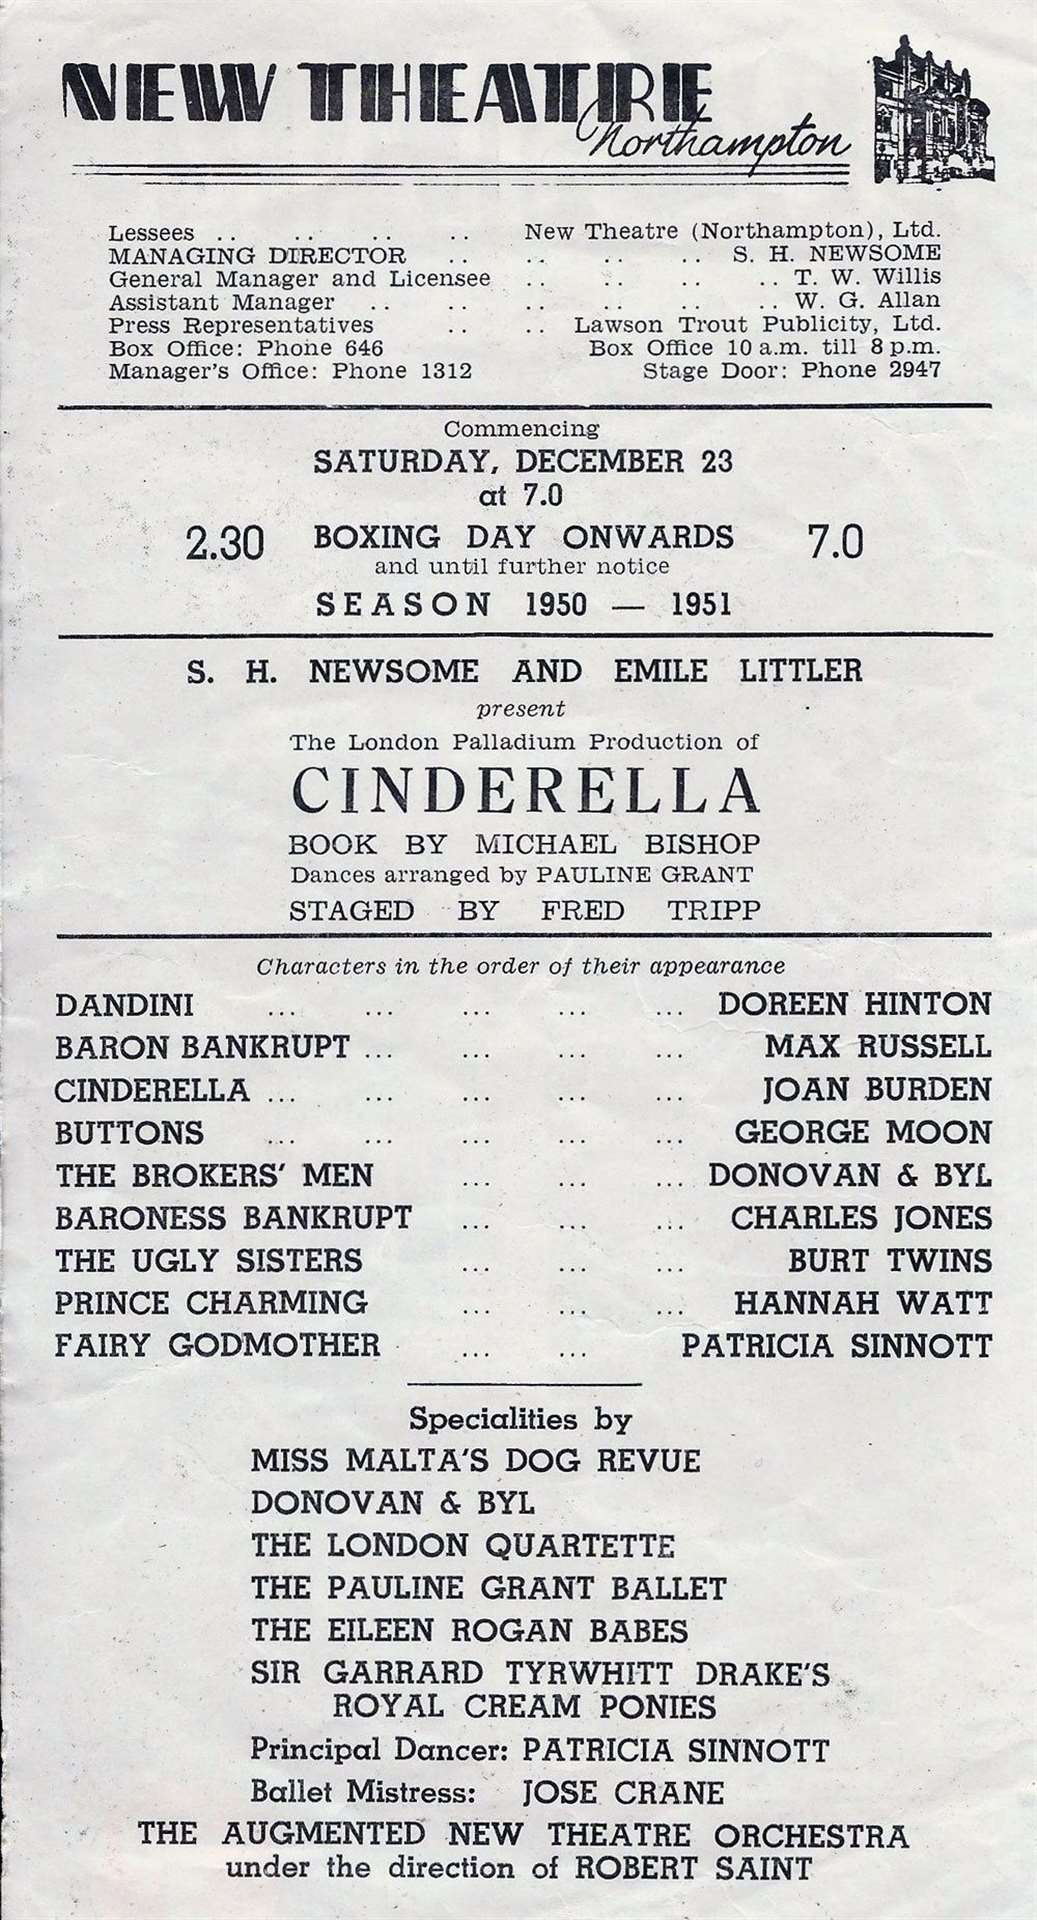 A programme for the Northampton New Theatre's production of Cinderella, with Sir Garrard's ponies on the cast list